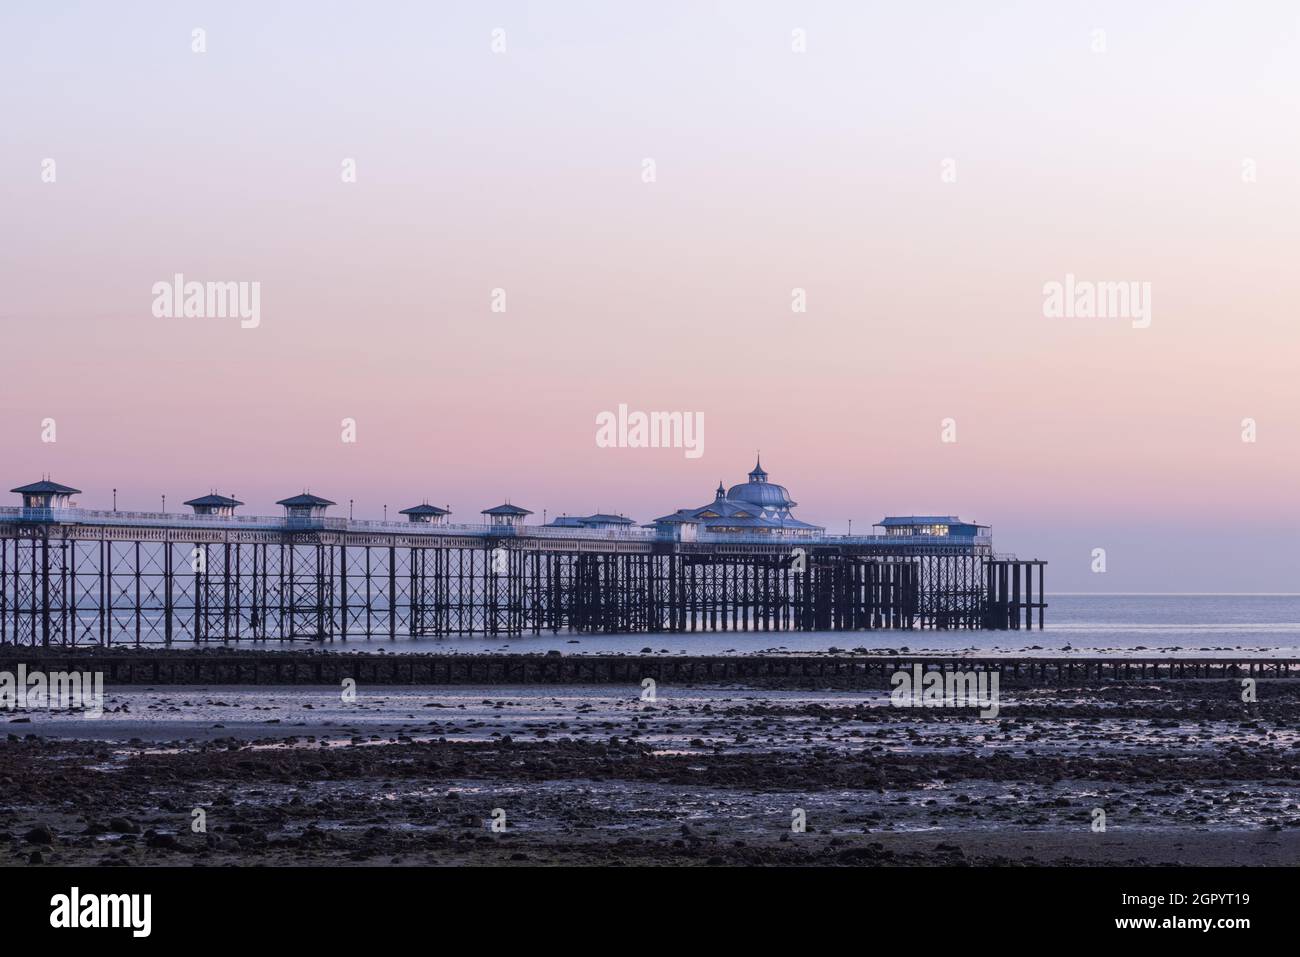 Llandudno, Conwy, UK, September 7th 2021: Just before sunrise Llandudno pier is lit by dawn light. The low tide has exposed the North Shore beach. Stock Photo